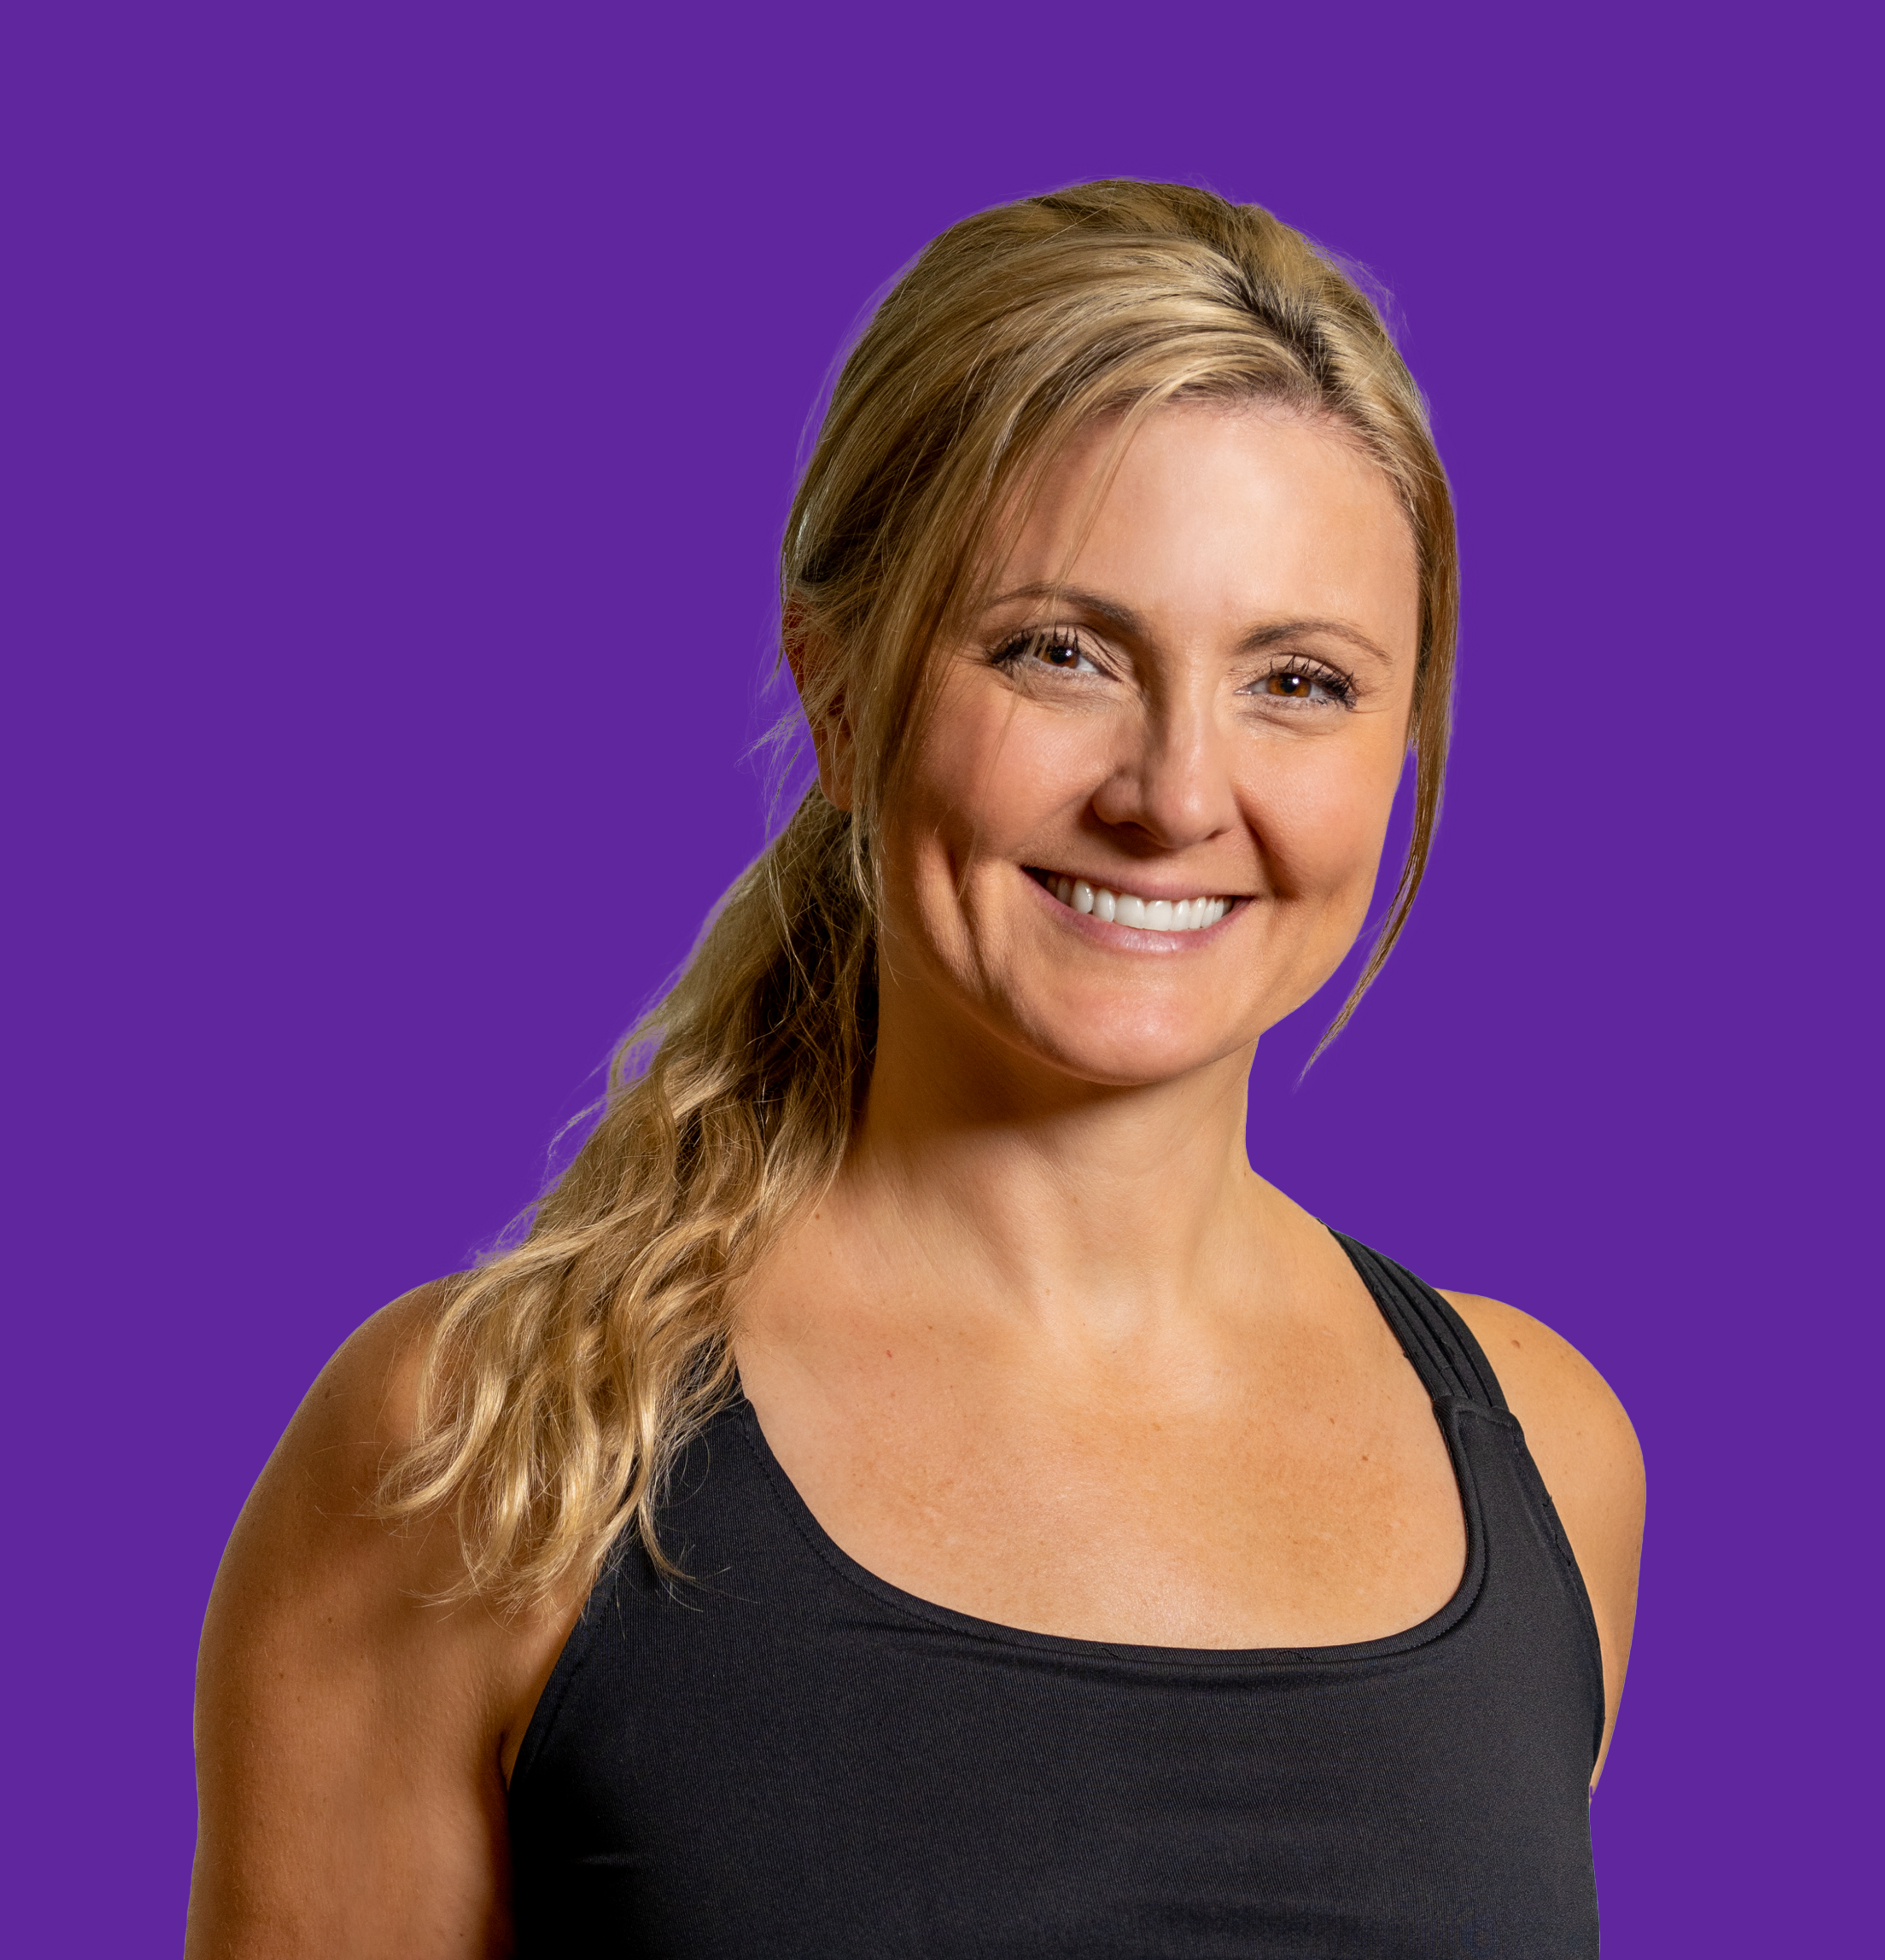 A profile photo of a female personal trainer smiling.